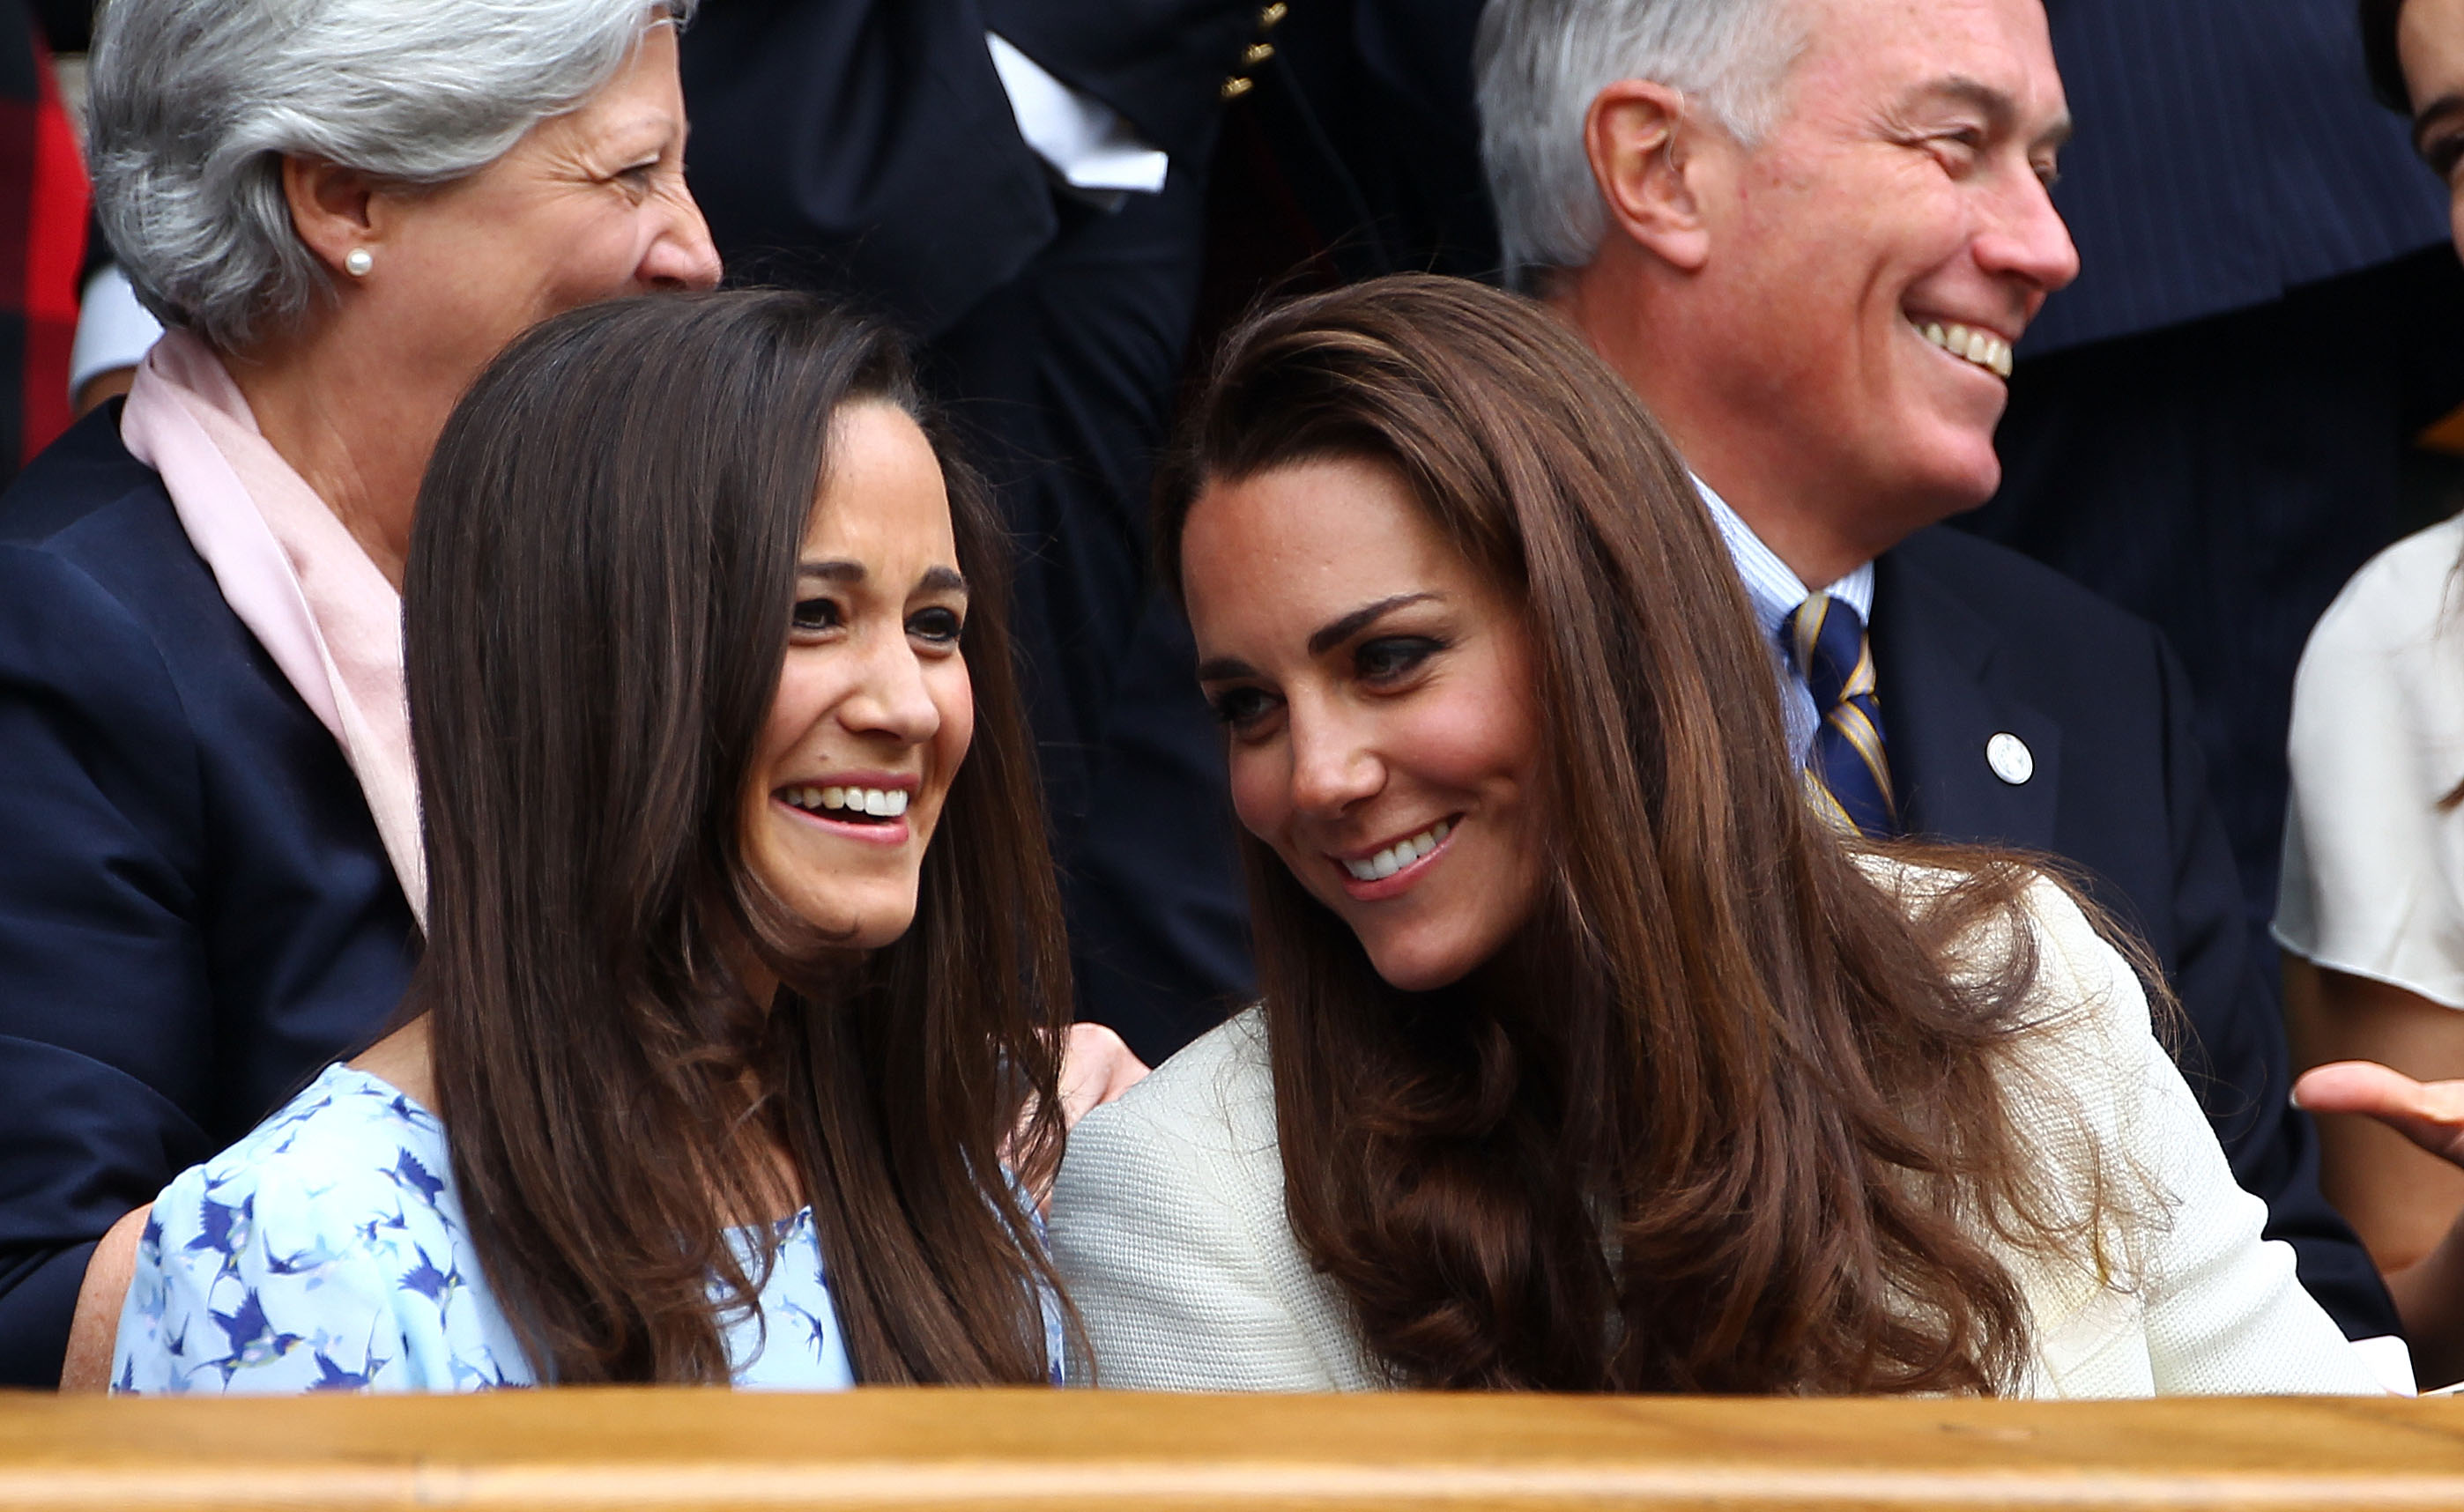 Pippa Middleton and Princess Catherine at Wimbledon in 2012 | Source: Getty Images